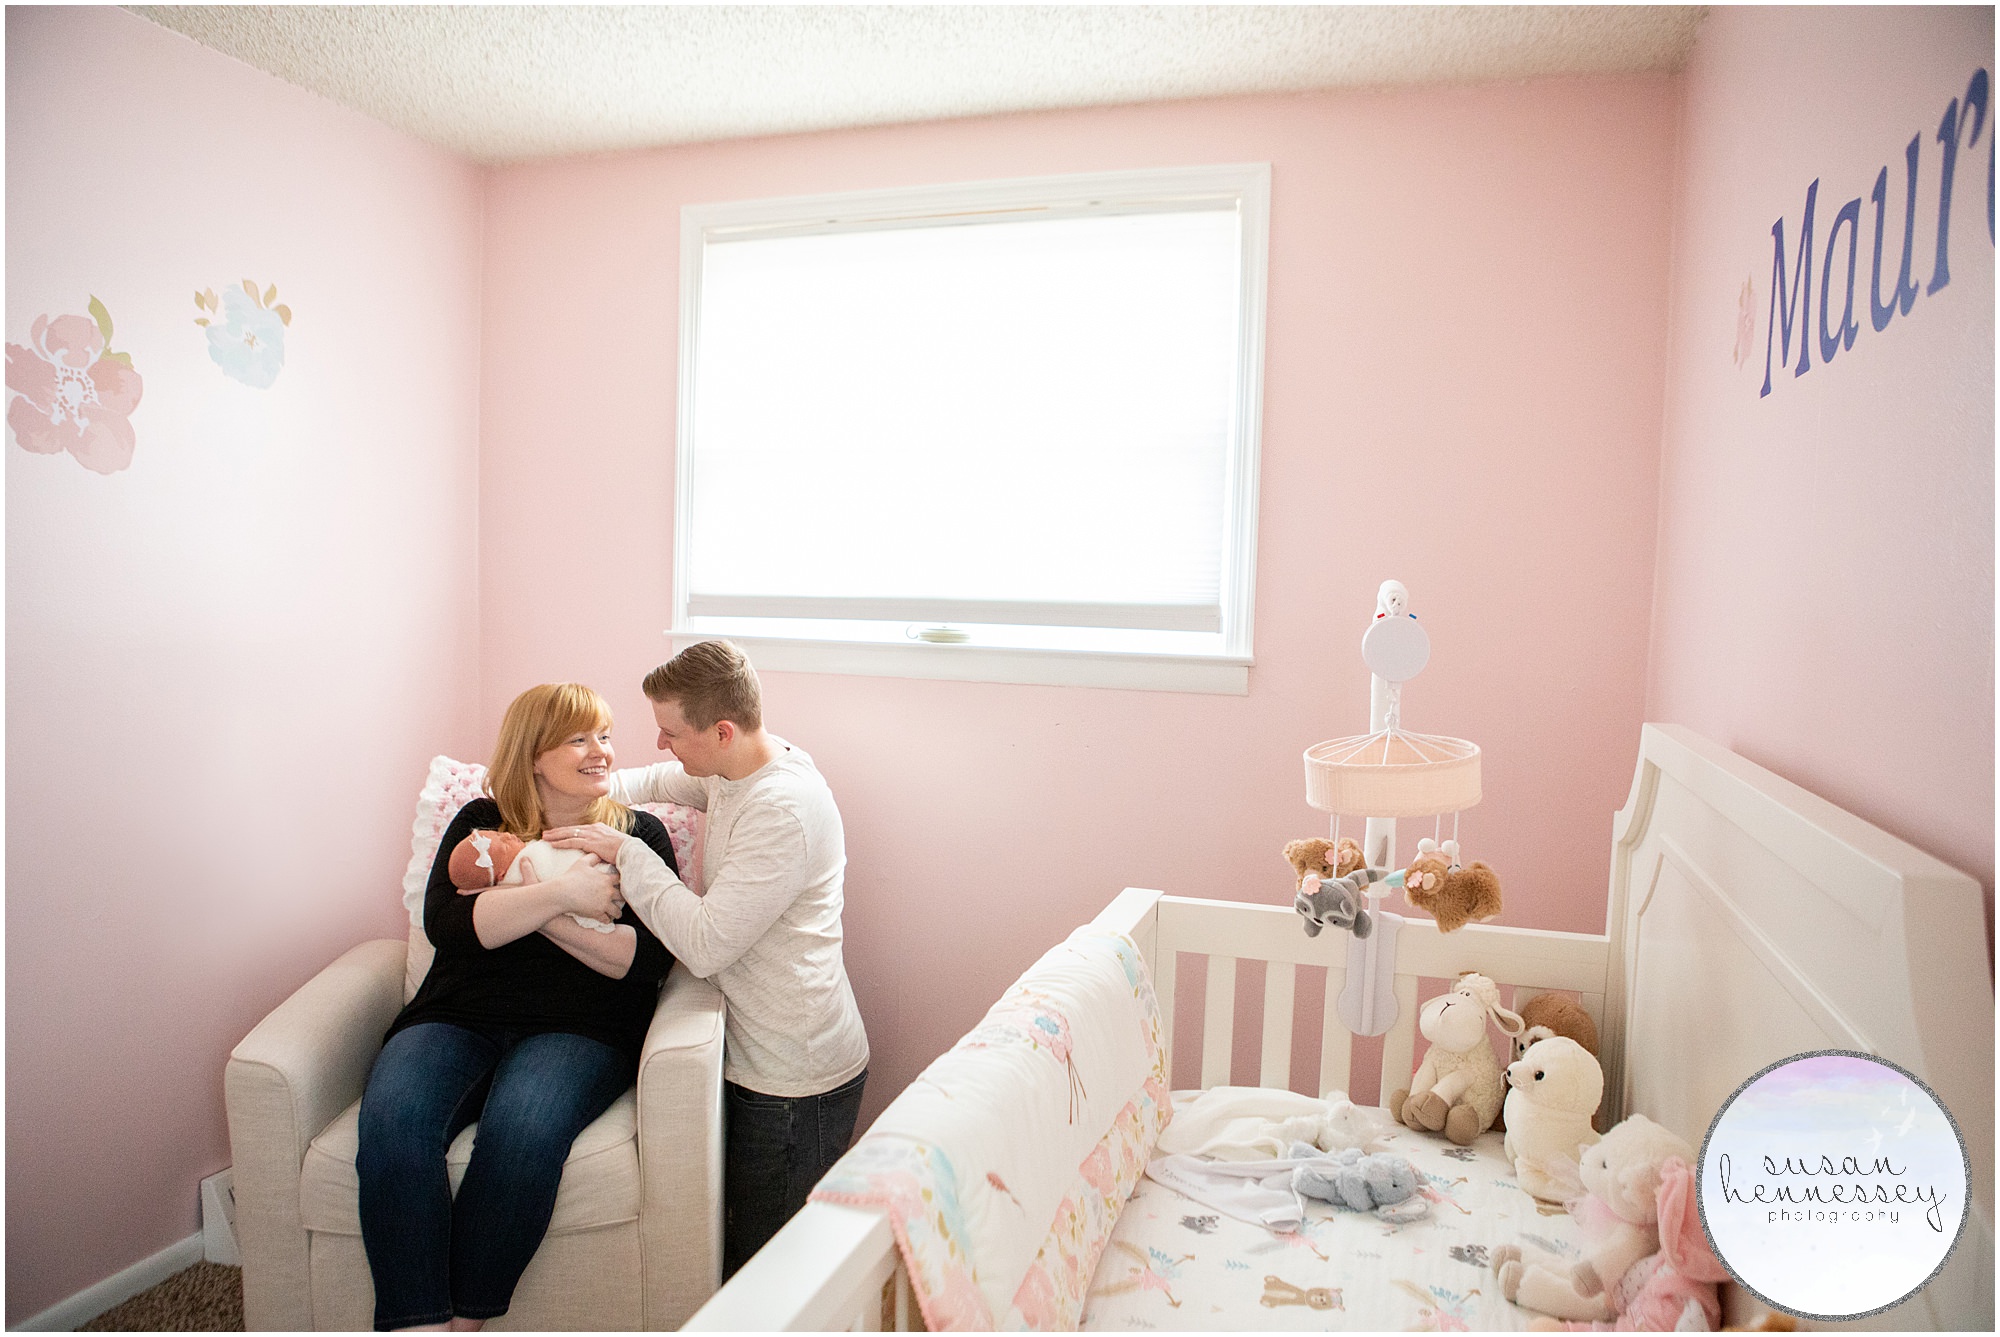 A look back at Maura's in home newborn session photographed in her nursery after her Rainbow Themed Cake Smash photography session